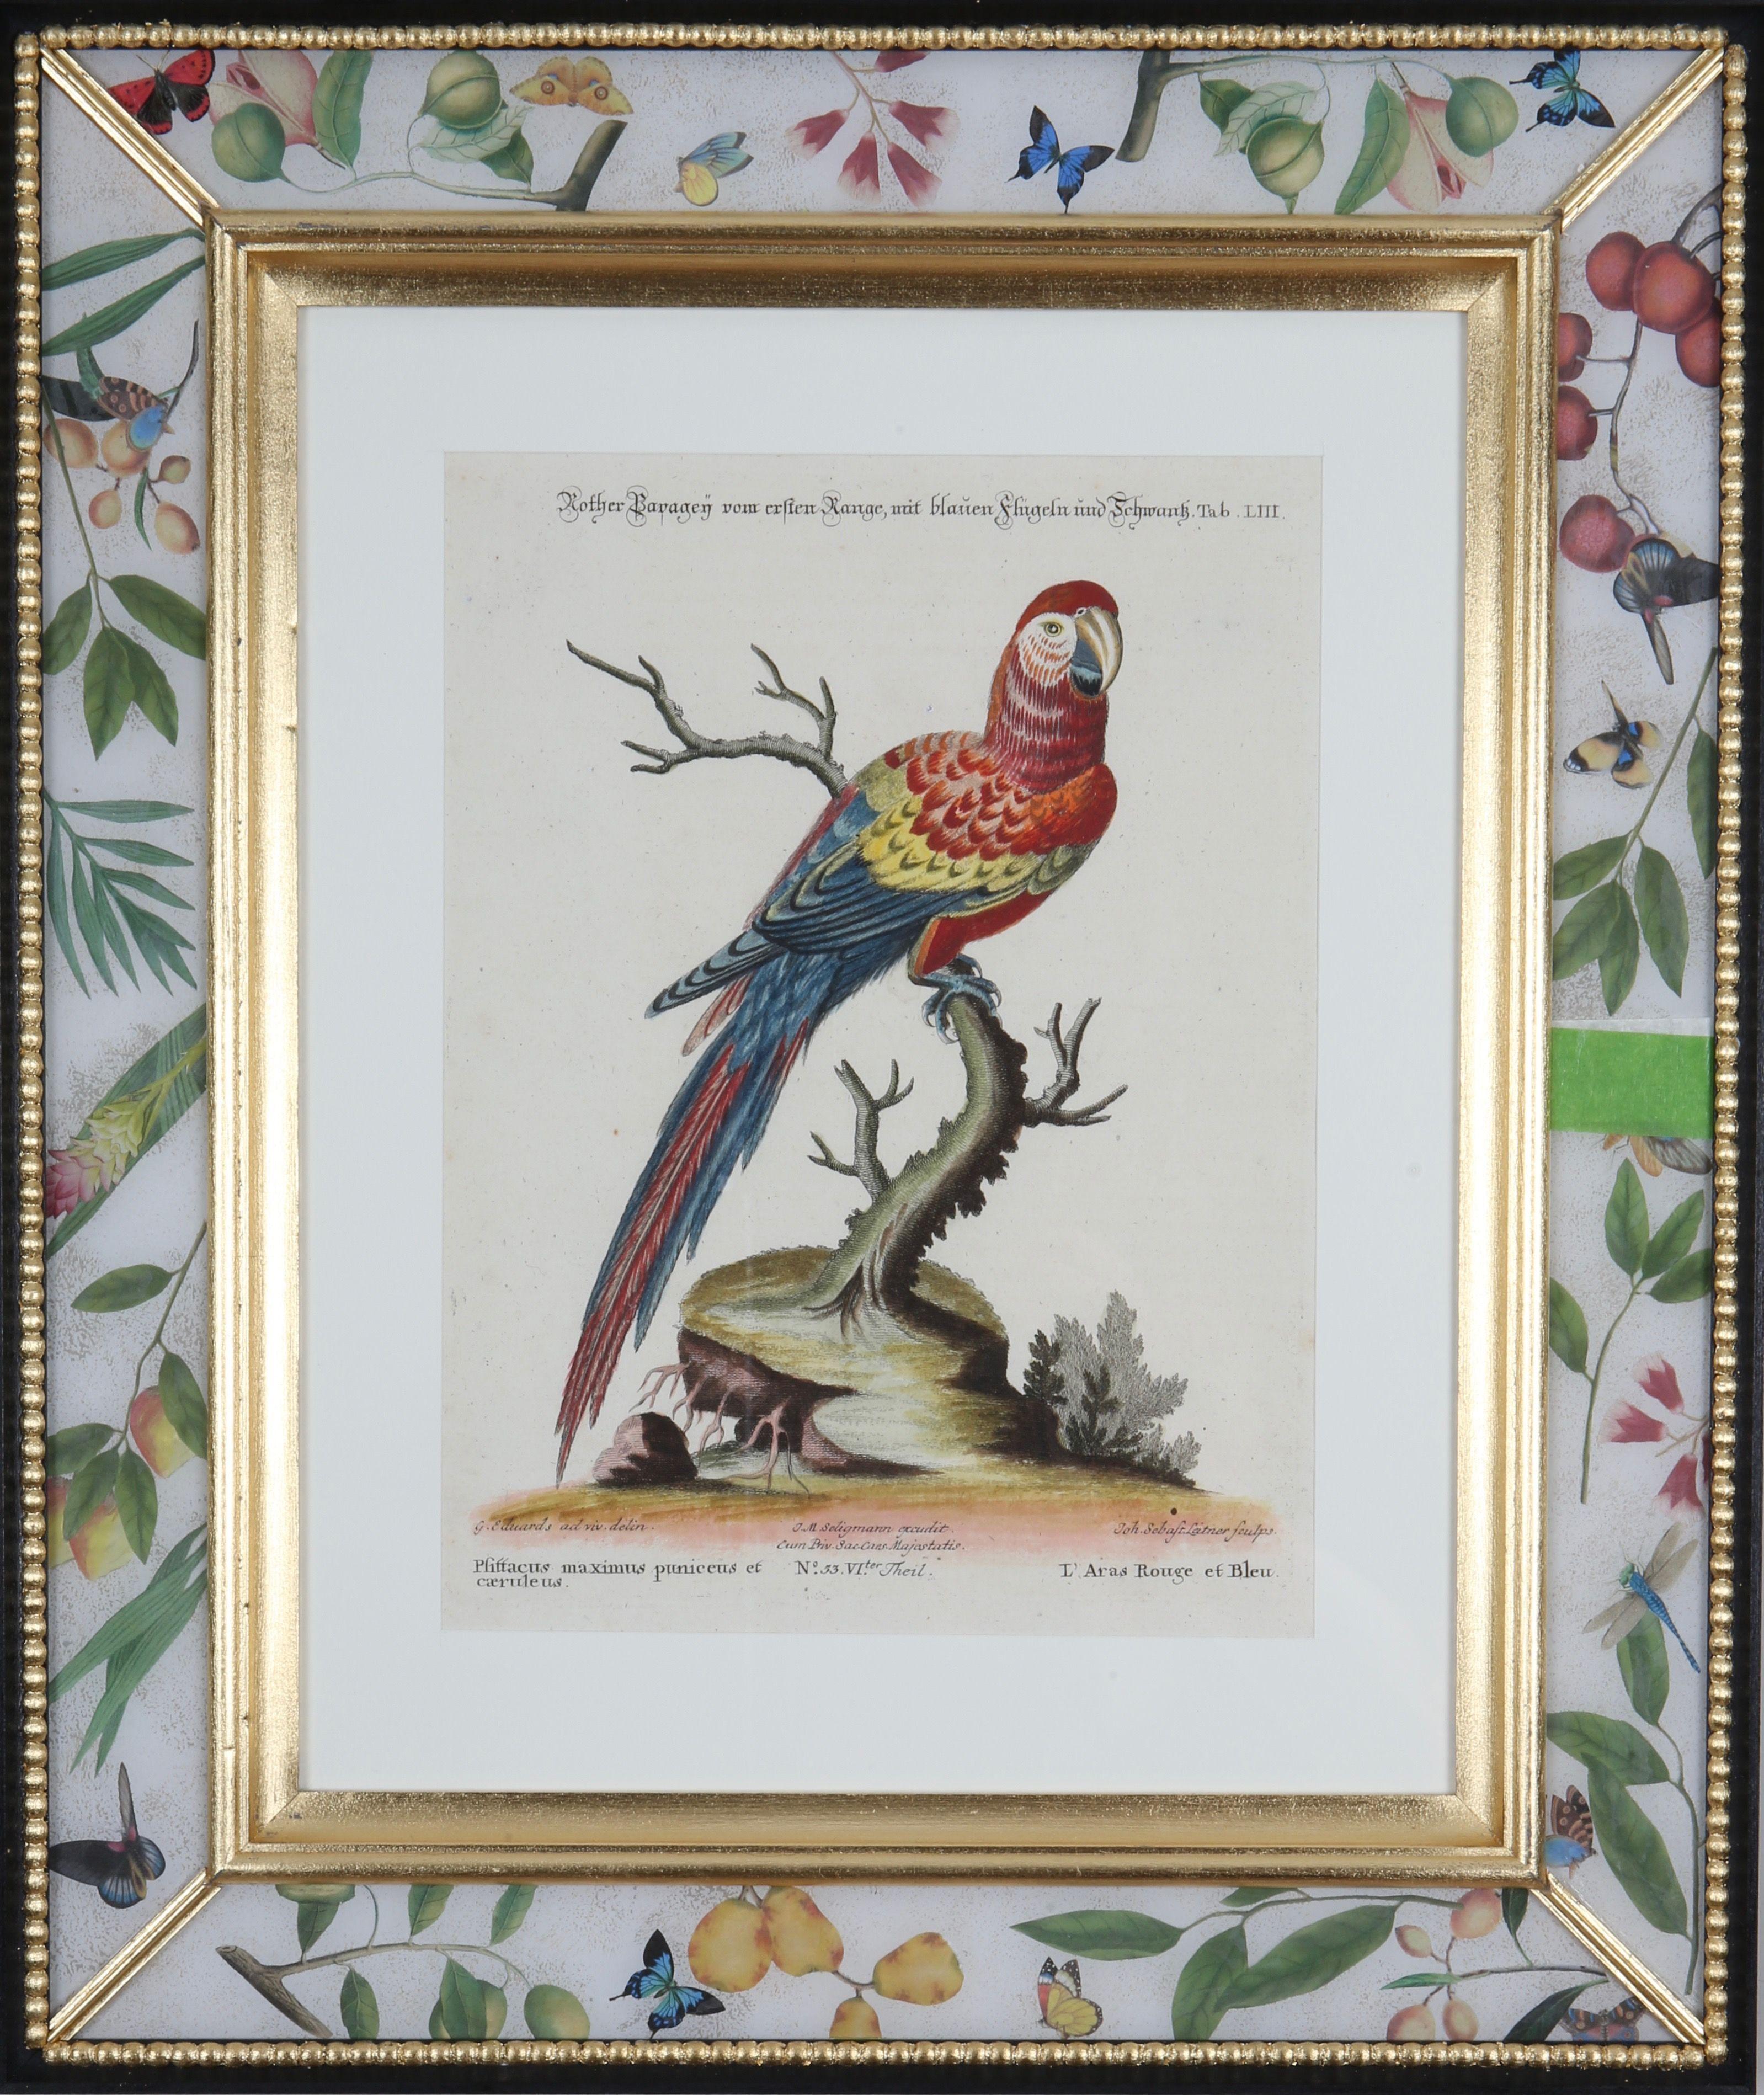 "Sammlung Verschiedenr Auslandischer und Selener Vogel", Nuremberg 1770-1773. Edited by Johann Michael Seligmann (1749 -1776): engravings with original hand-colouring after the drawings by George Edwards.

A prominent English naturalist and